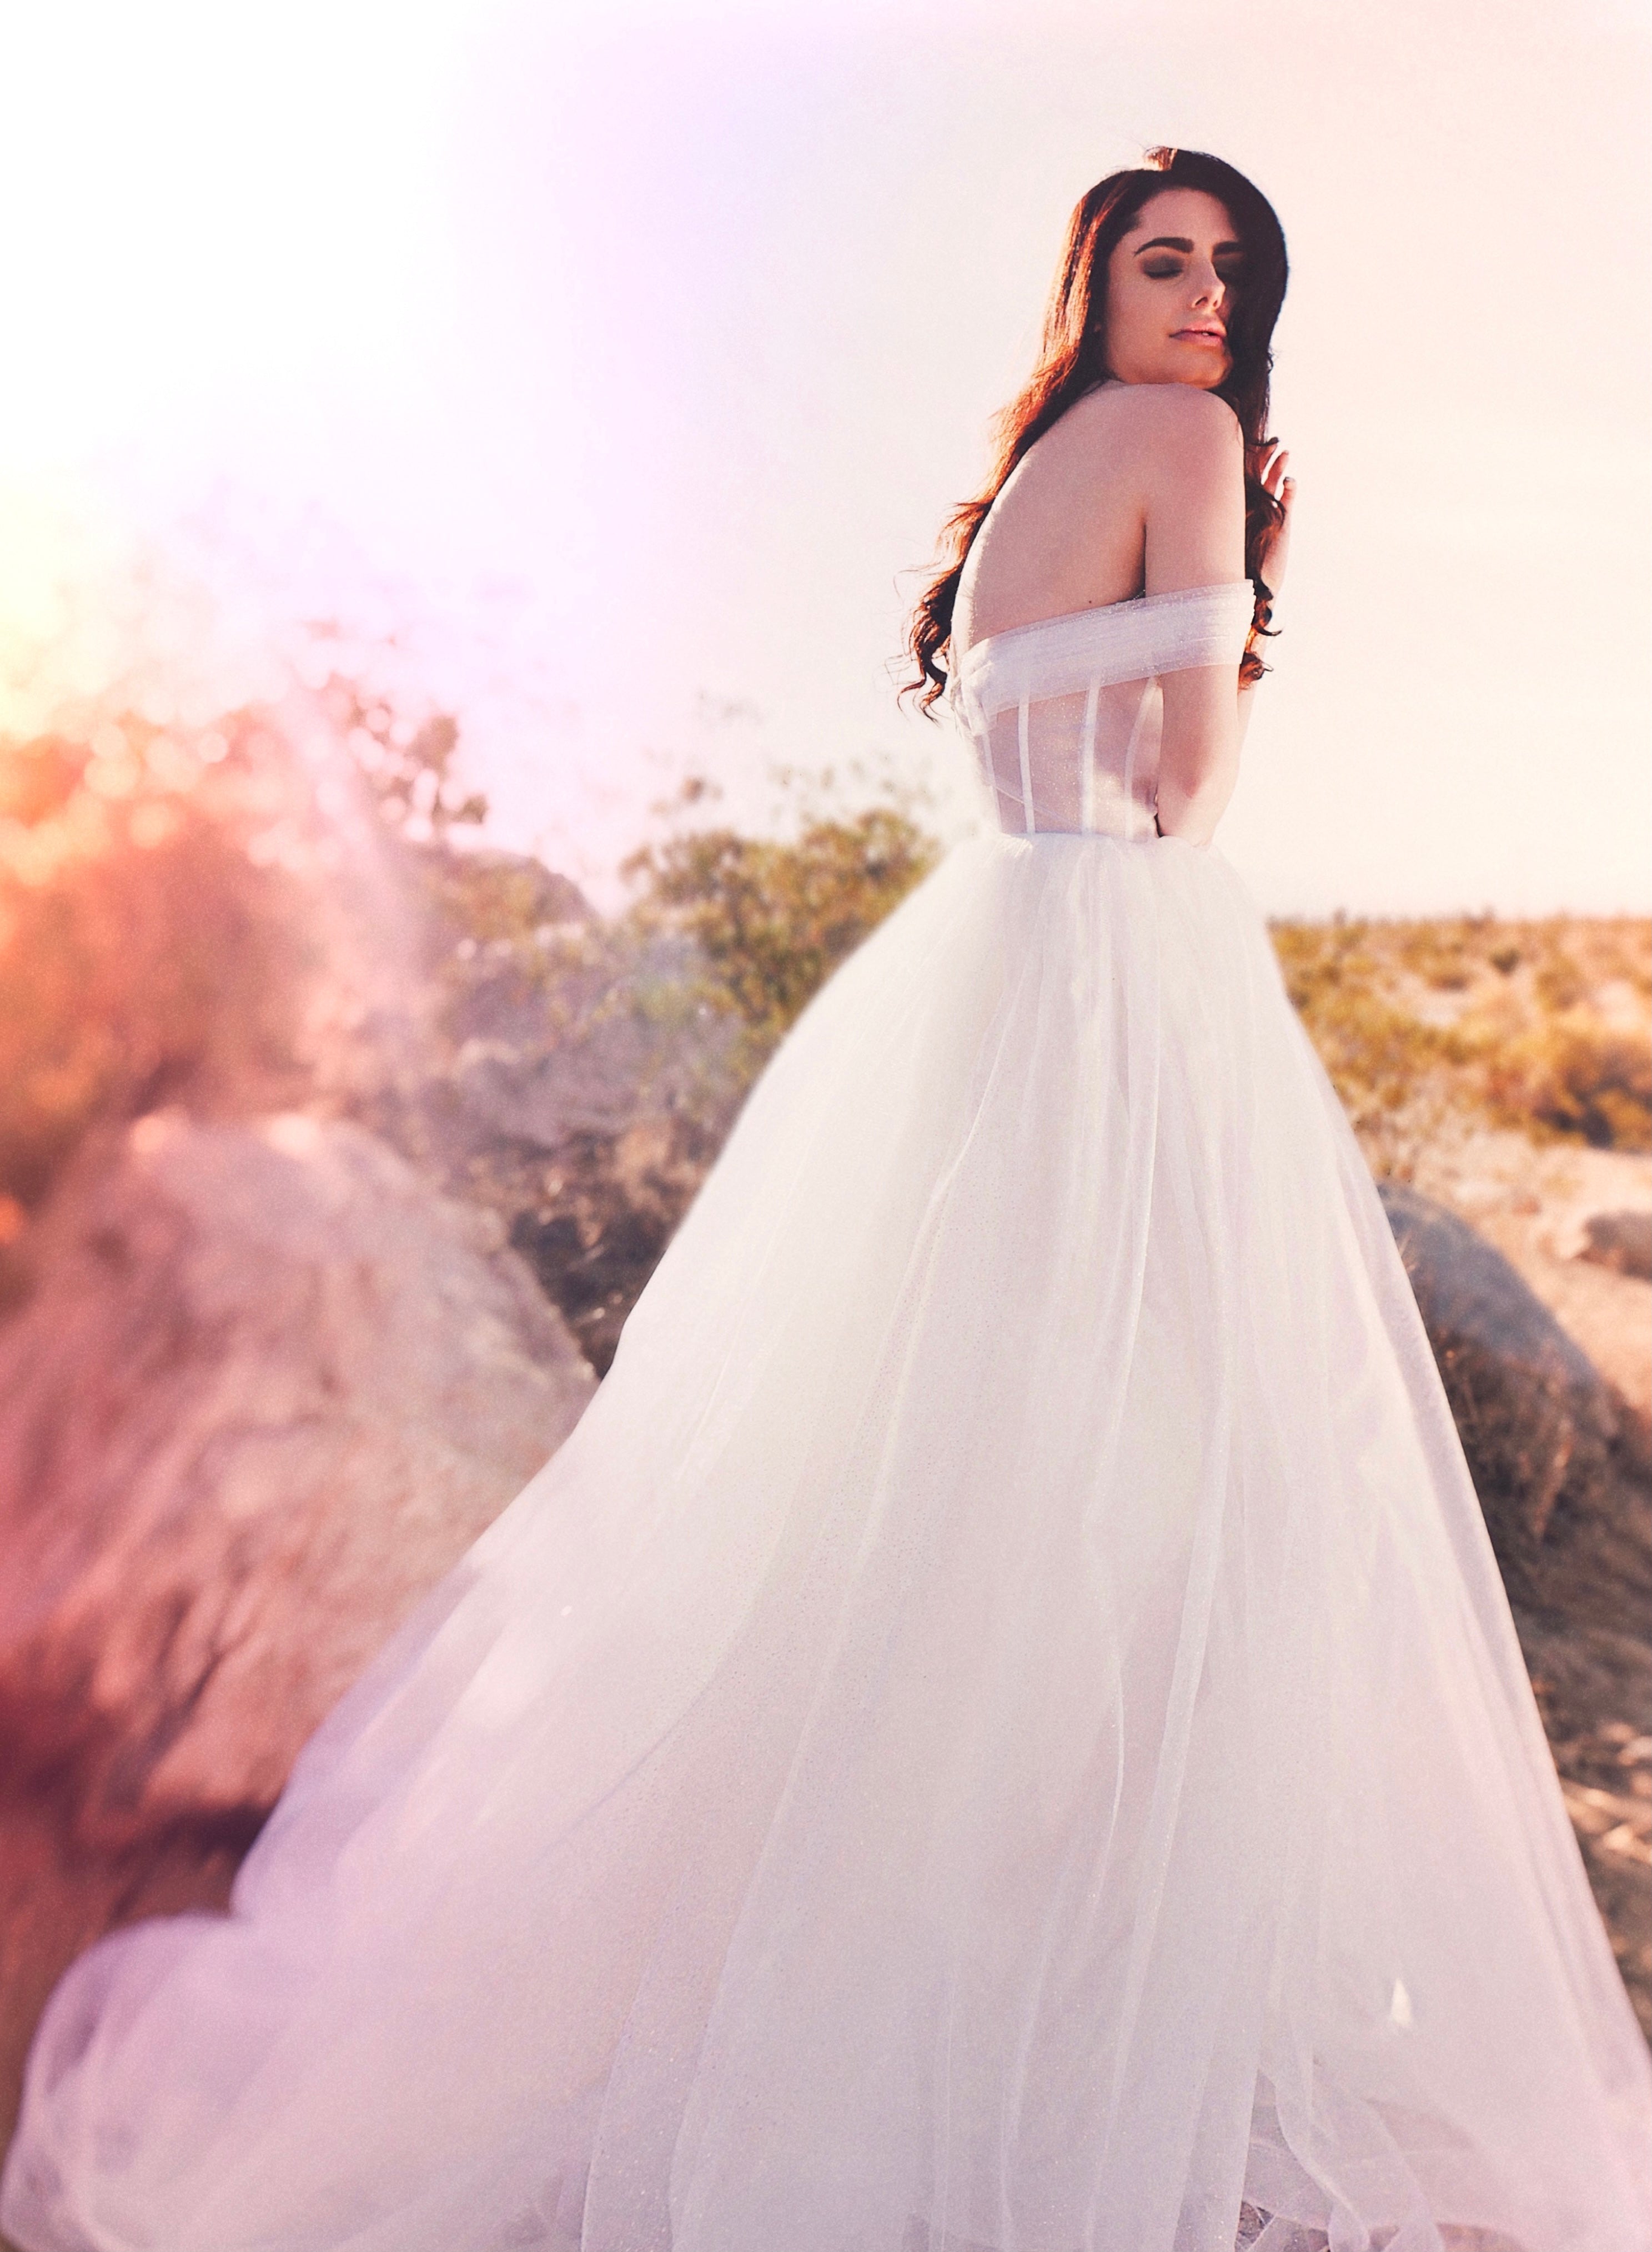 Sparkly organza wedding dress with off the shoulder strap shot at sunset